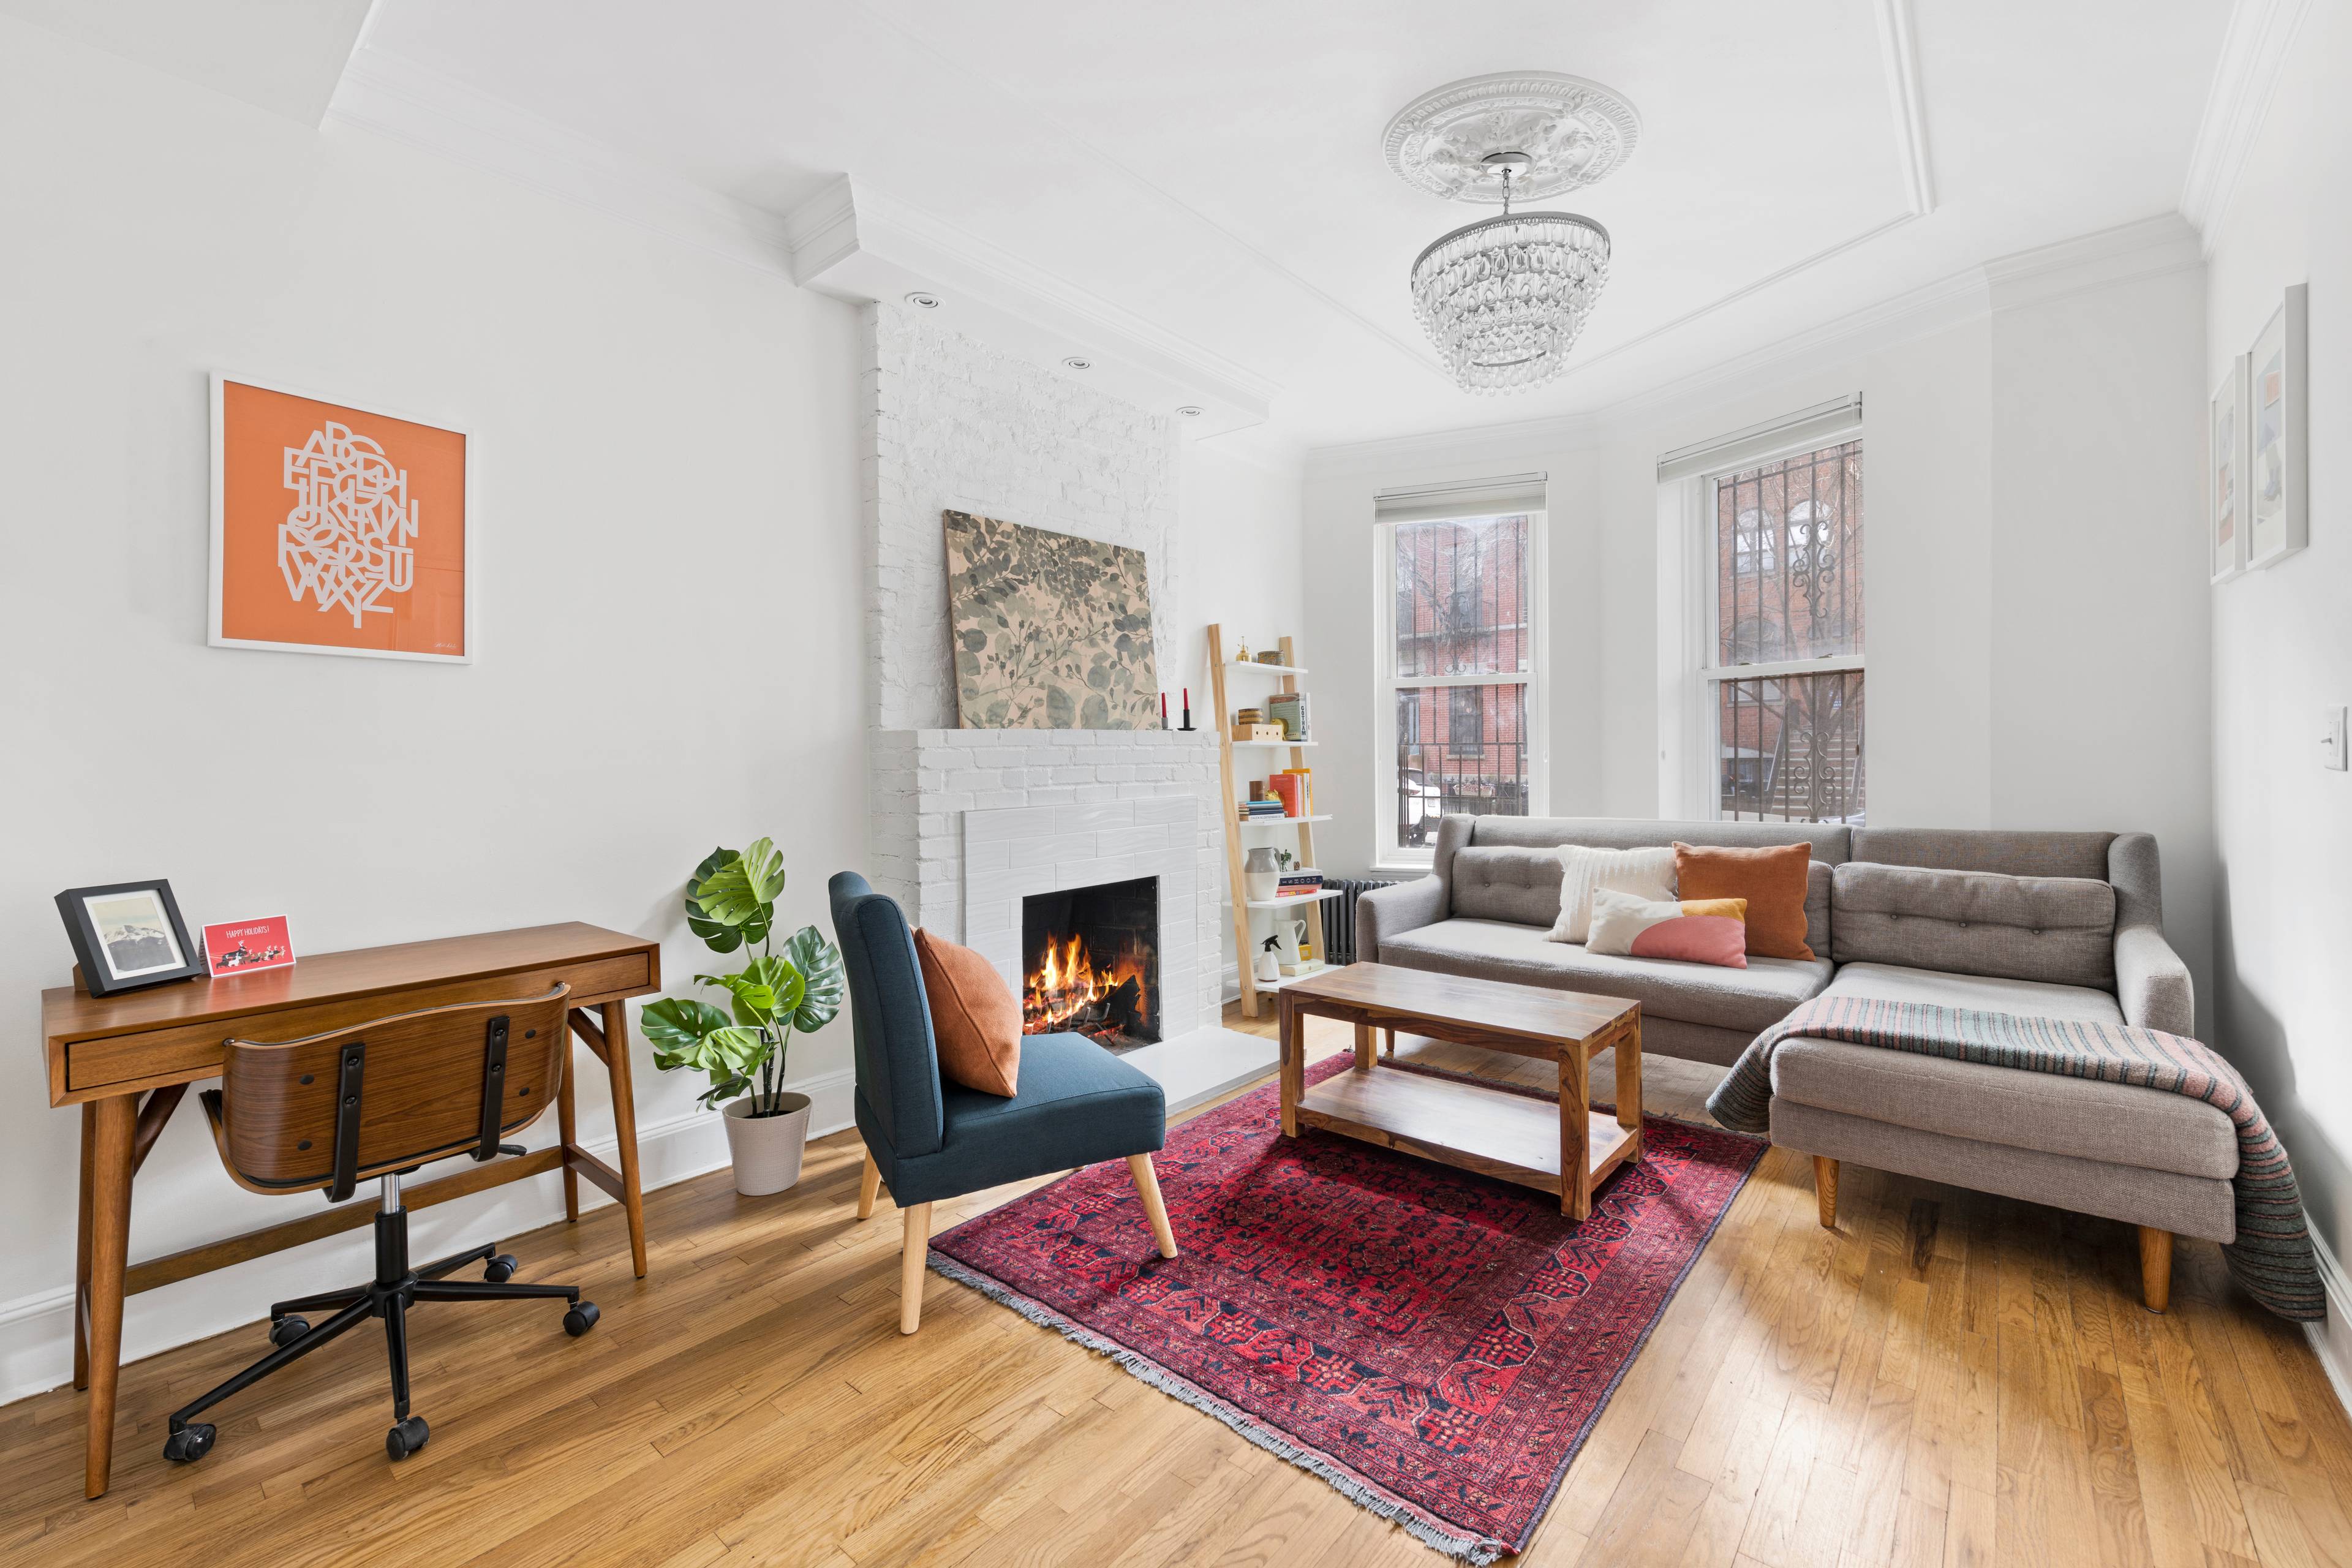 A Park Slope gem offering prewar charm and a fresh renovation in a bright one bedroom.